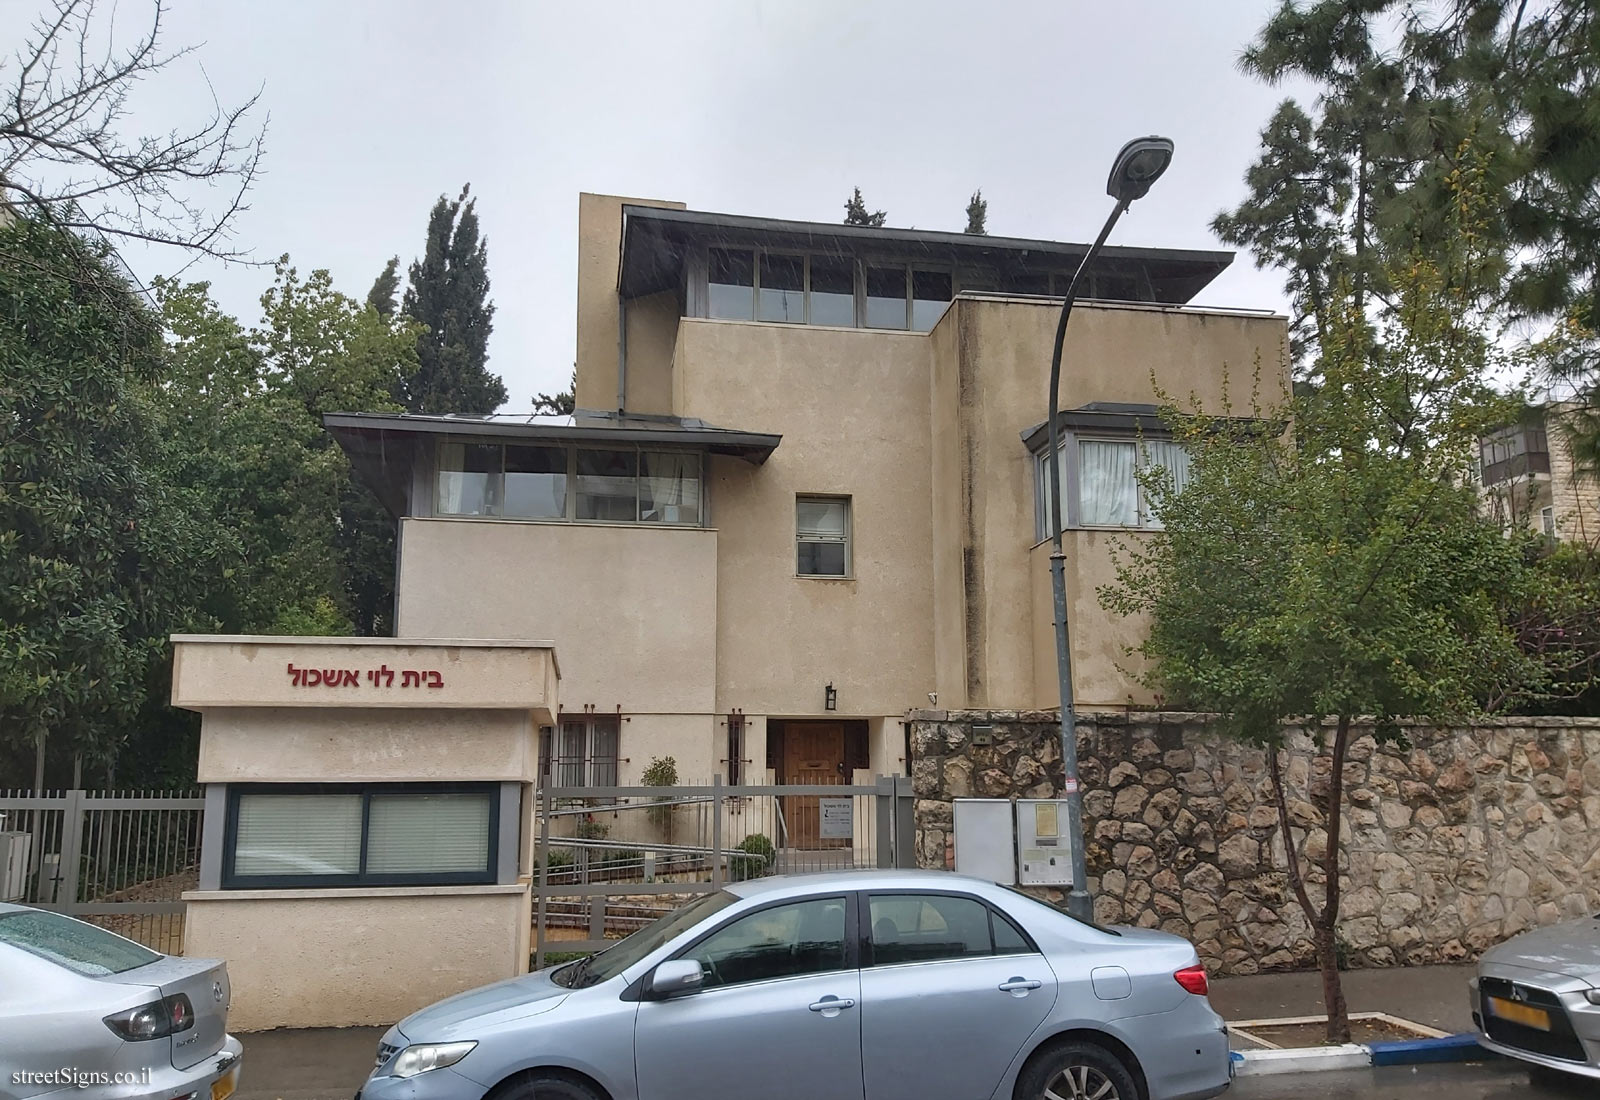 Heritage Sites in Israel - Jacobs’ House - The Prime Ministers’ Residence - Sderot Ben Maimon 46, Jerusalem, Israel